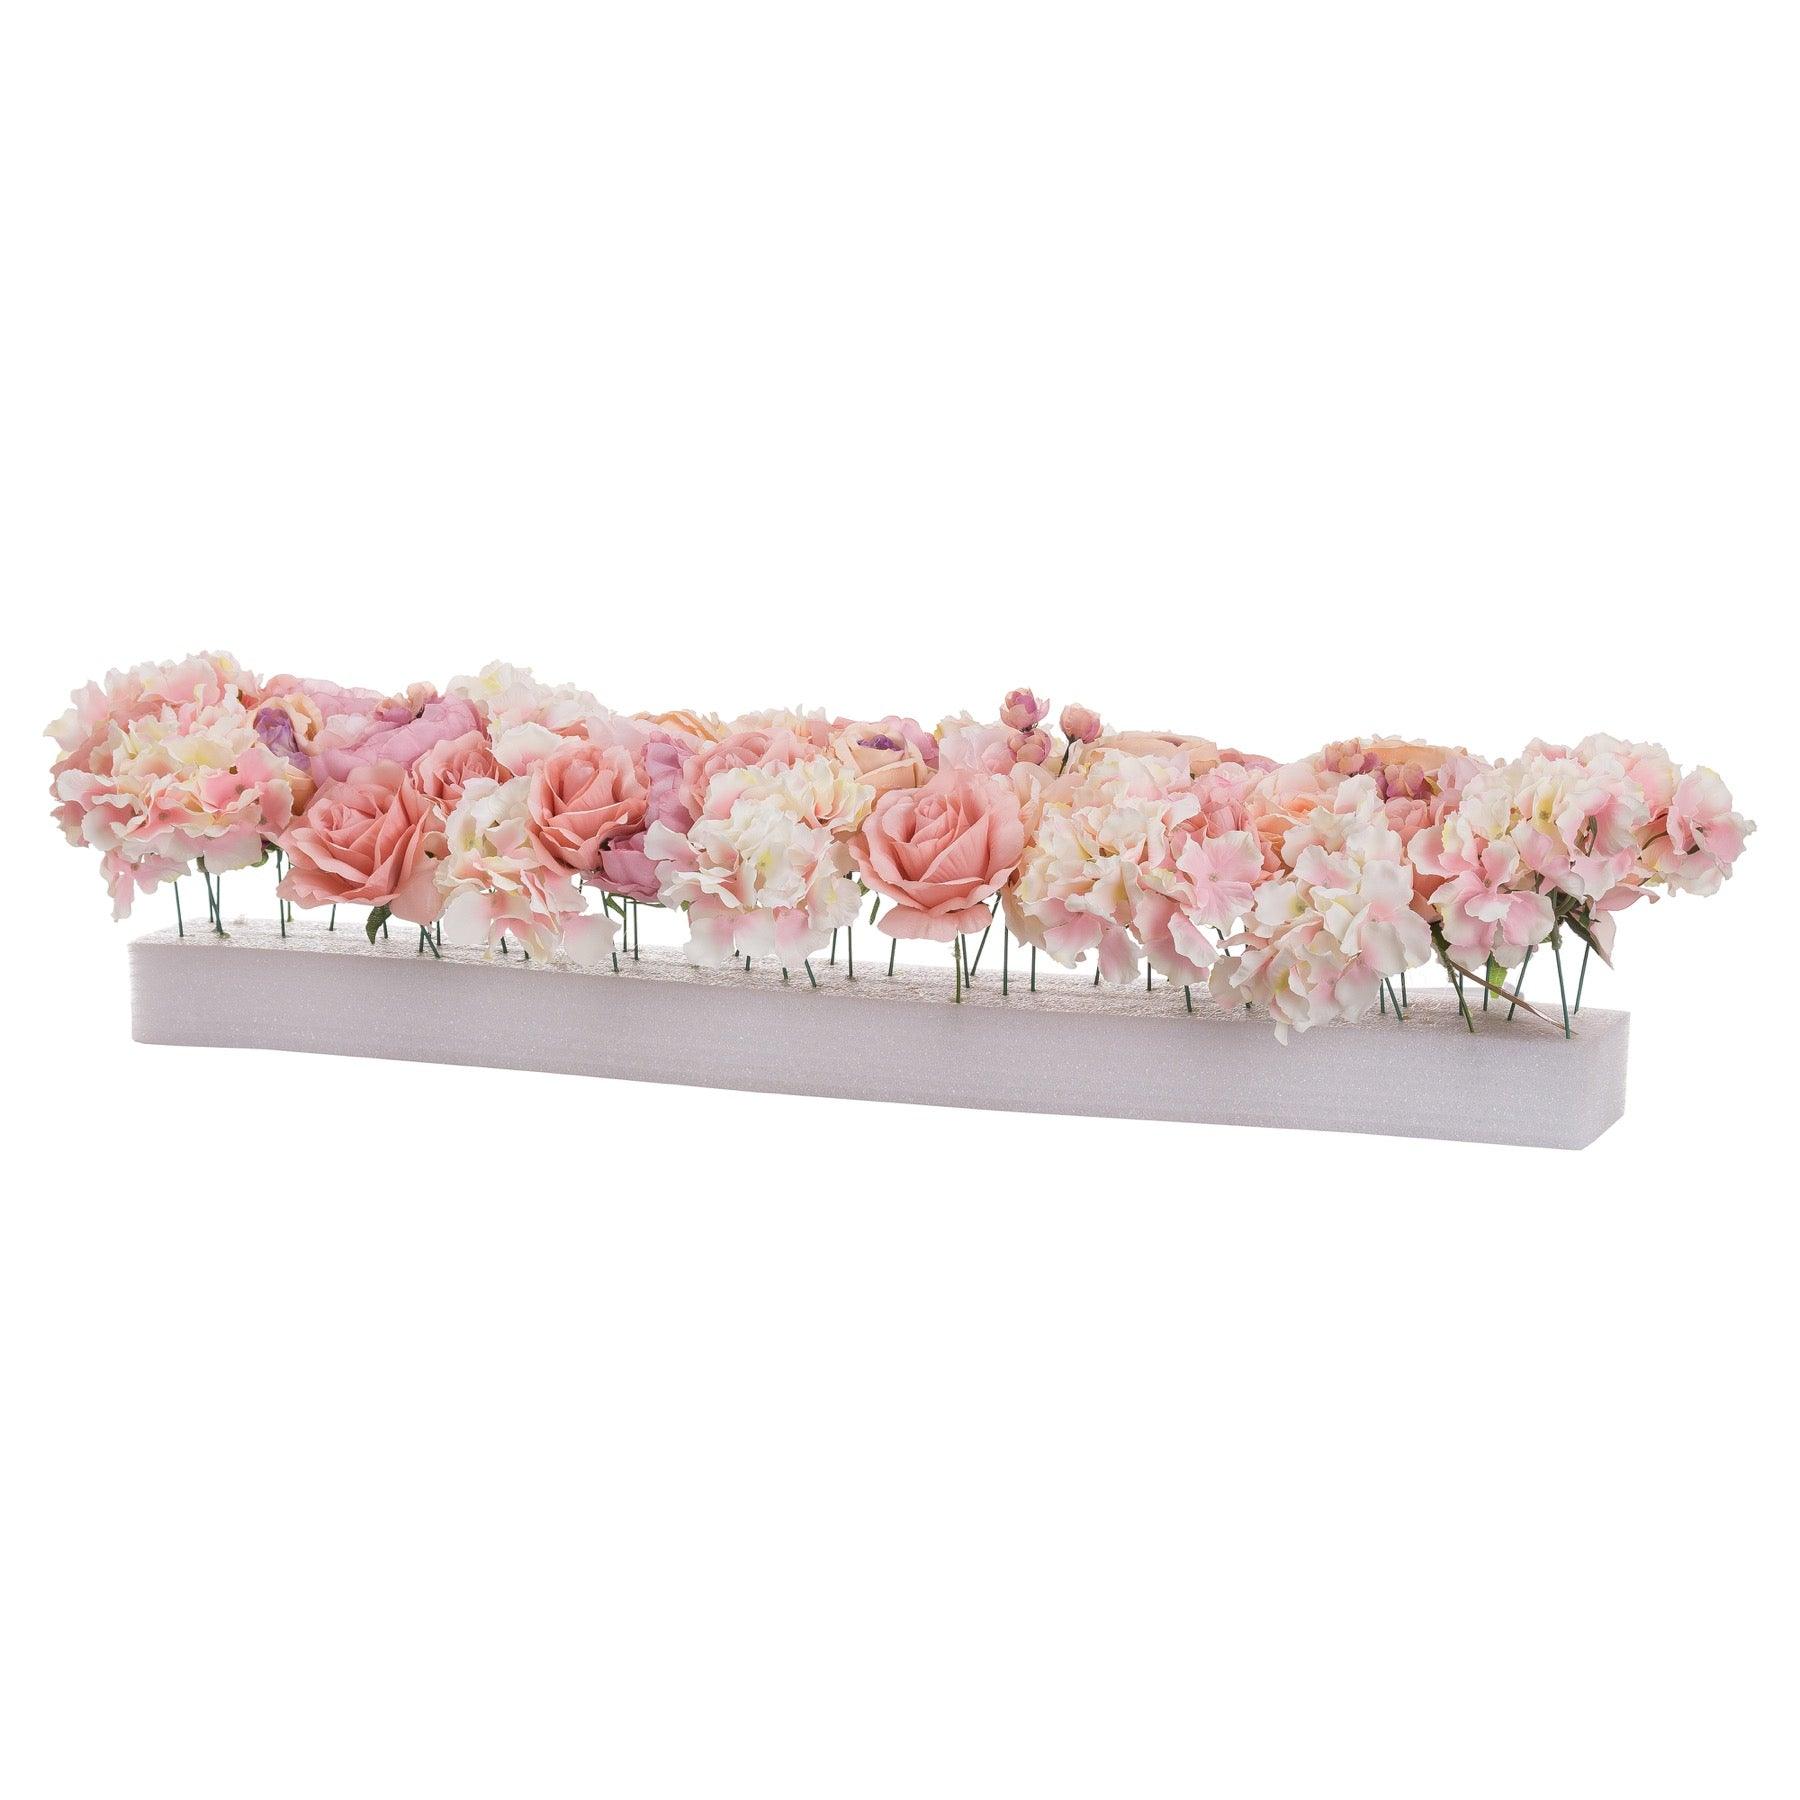 View Blush Pink Table Runner information